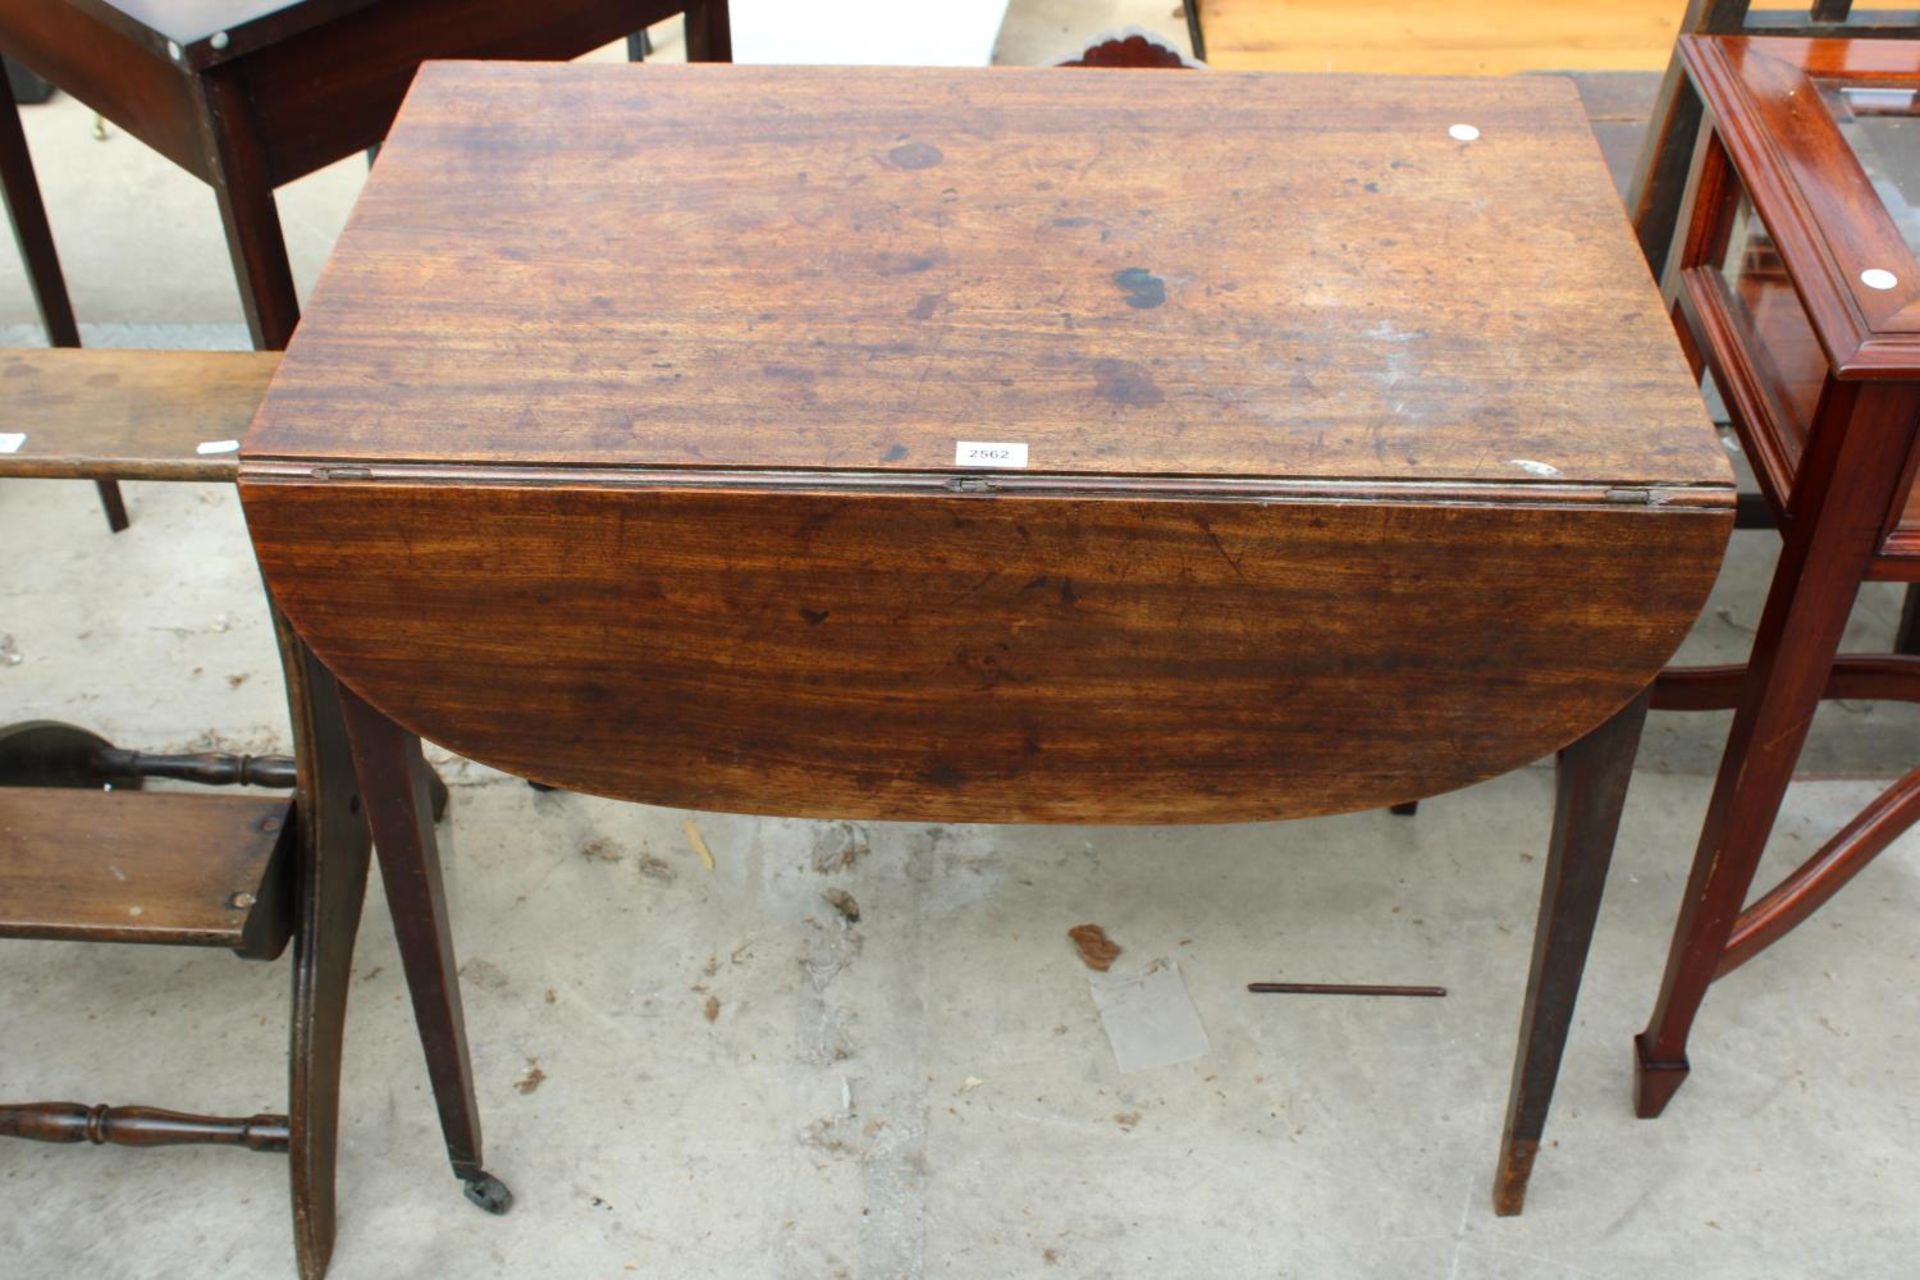 A 19TH CENTURY MAHOGANY PEMBROKE TABLE WITH SINGLE DRAWER AND SHAM DRAWER